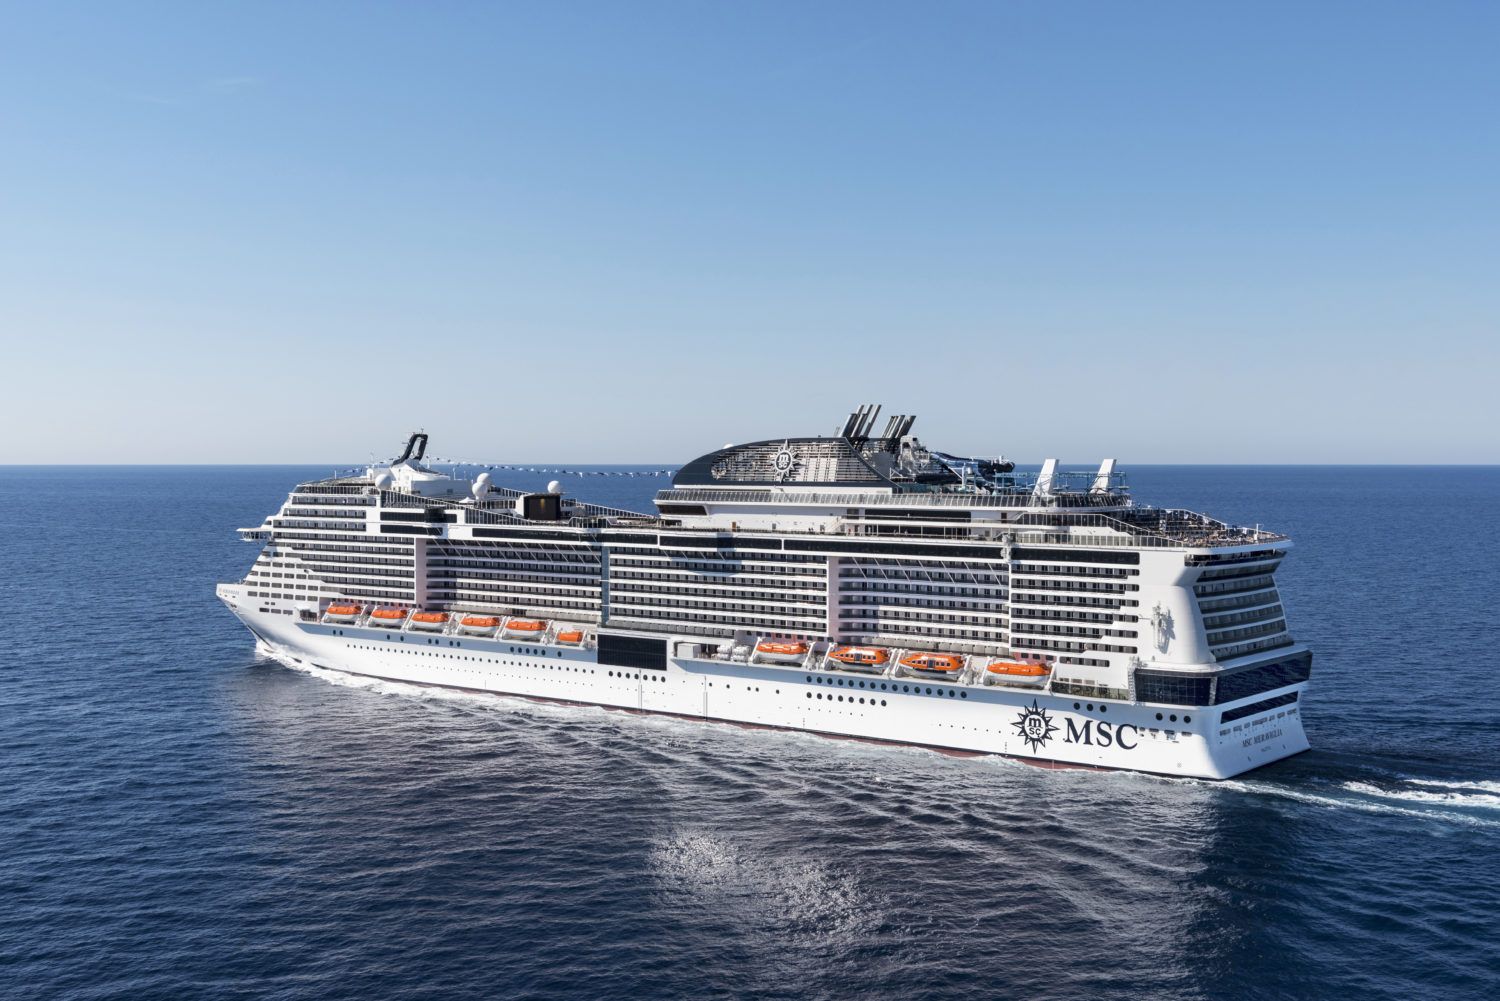 List of MSC Cruise Ships: Newest to Oldest